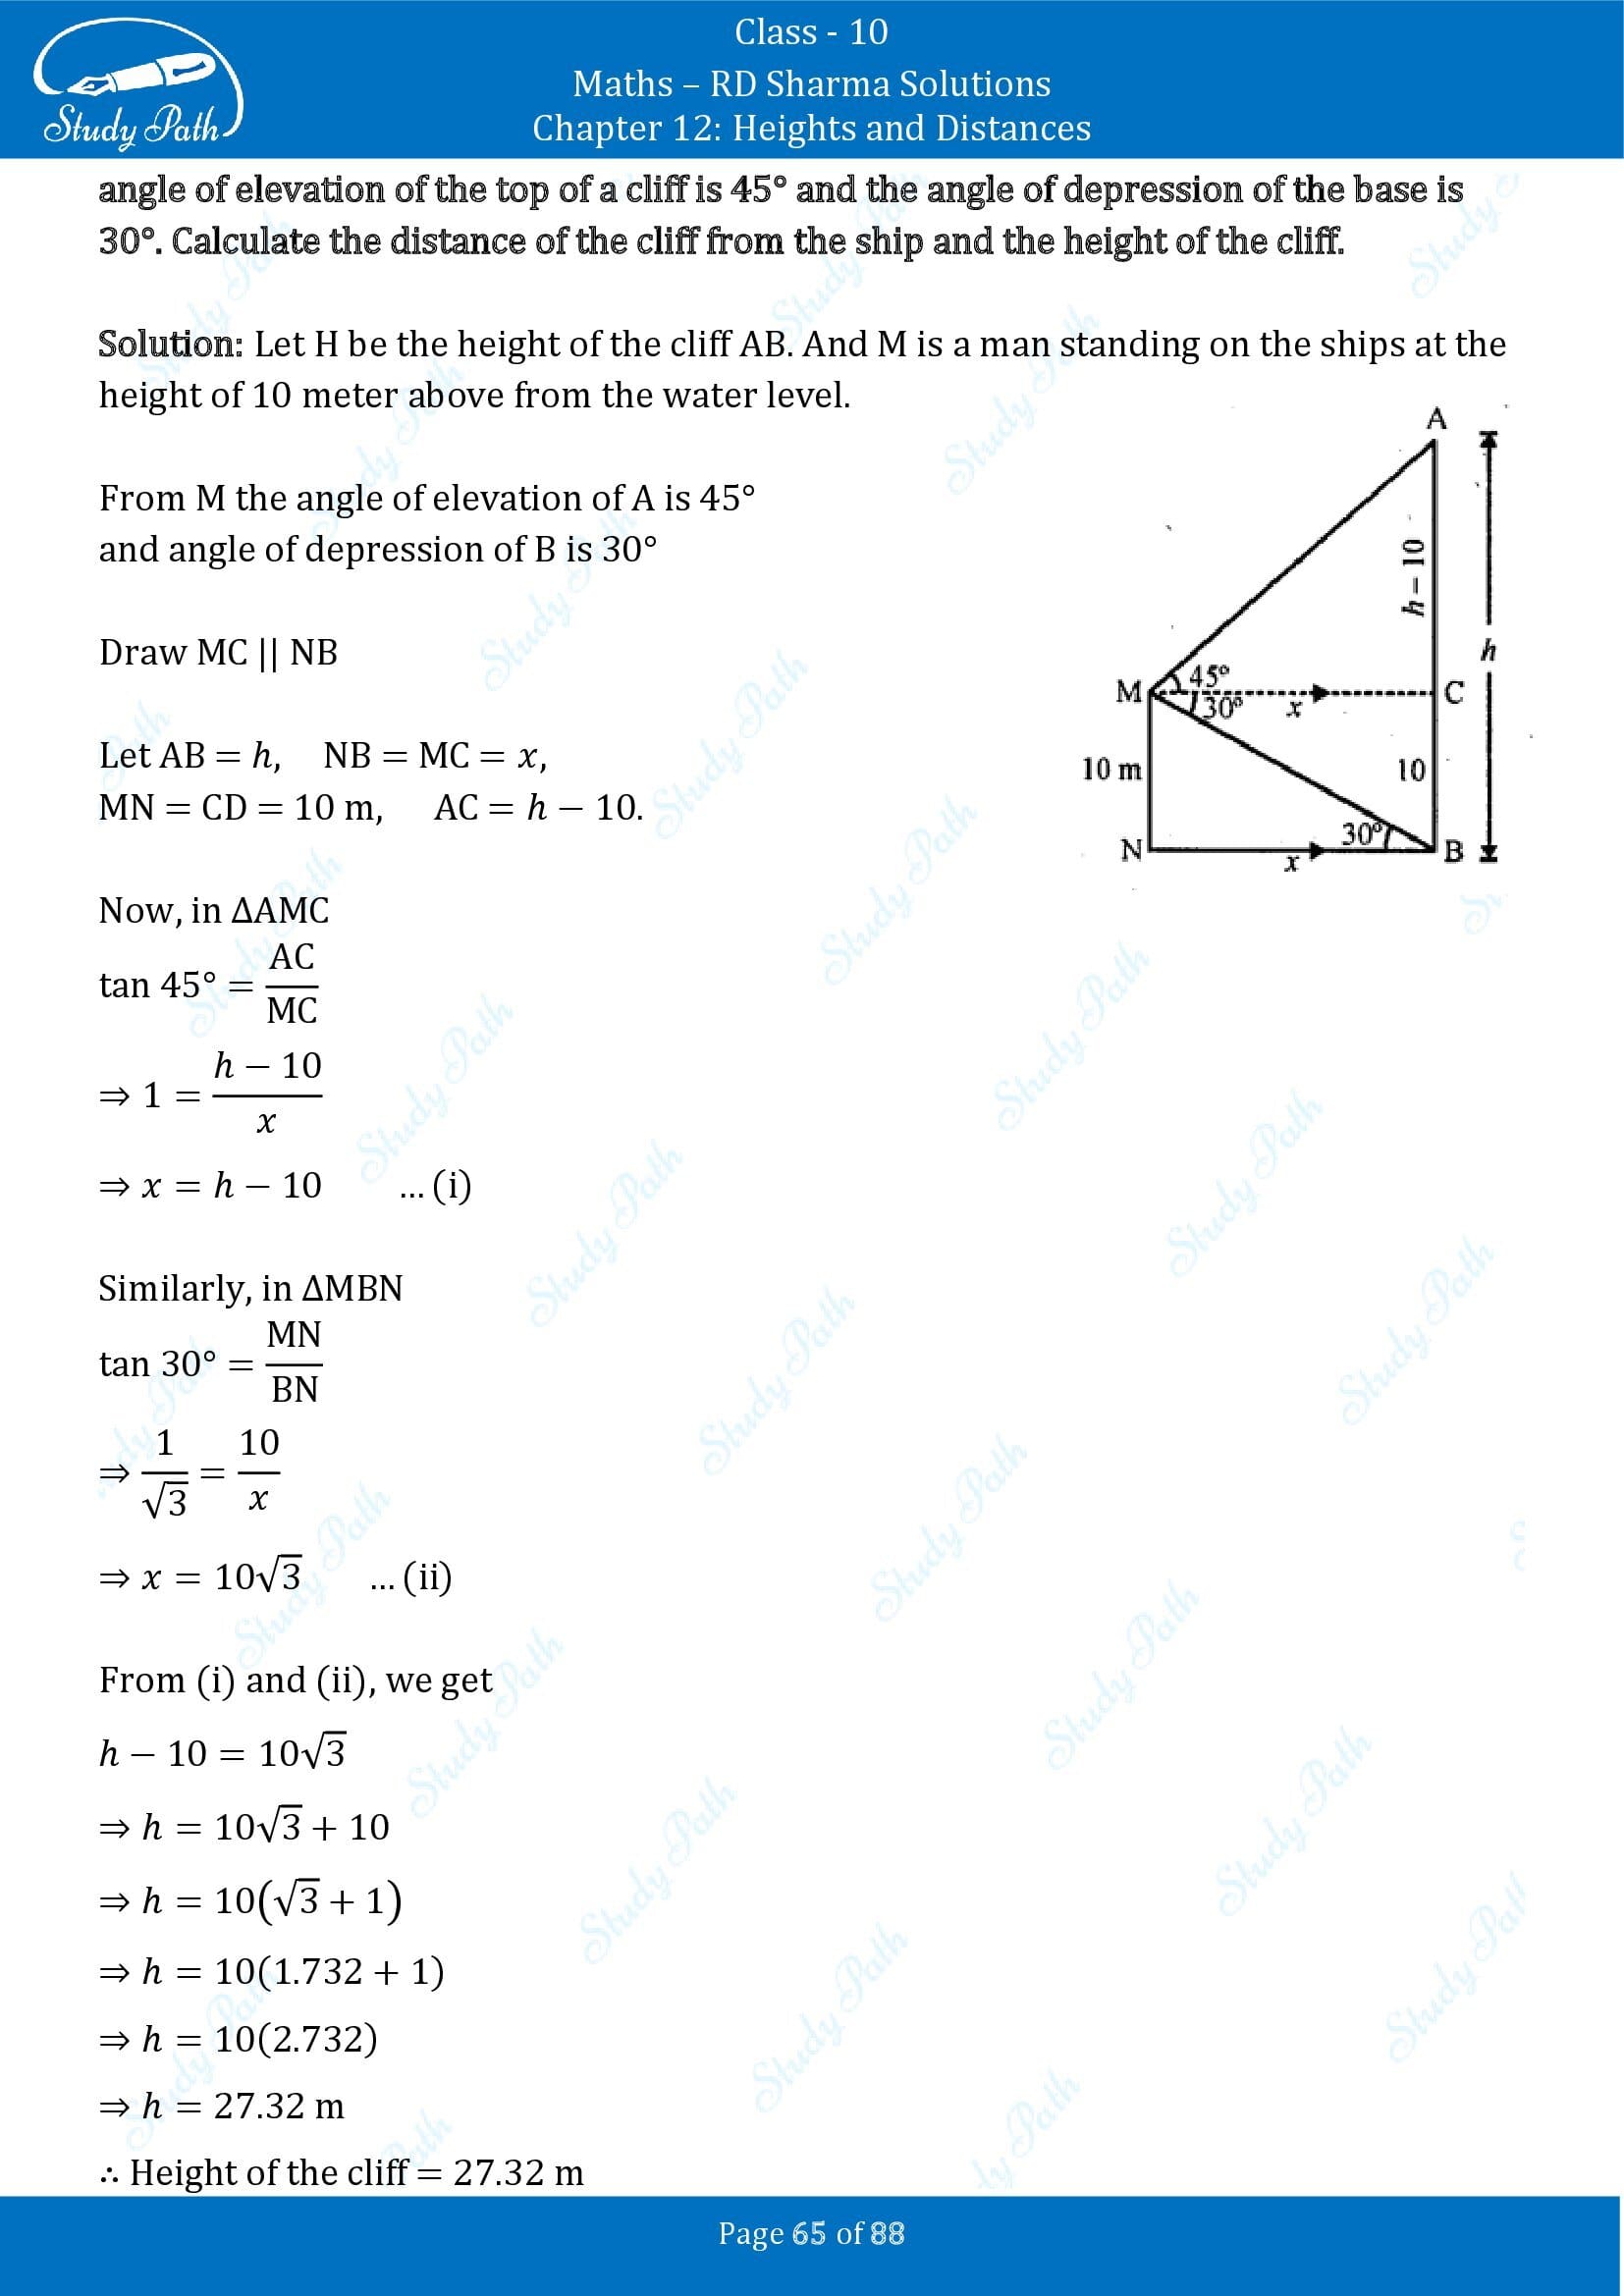 RD Sharma Solutions Class 10 Chapter 12 Heights and Distances Exercise 12.1 00065